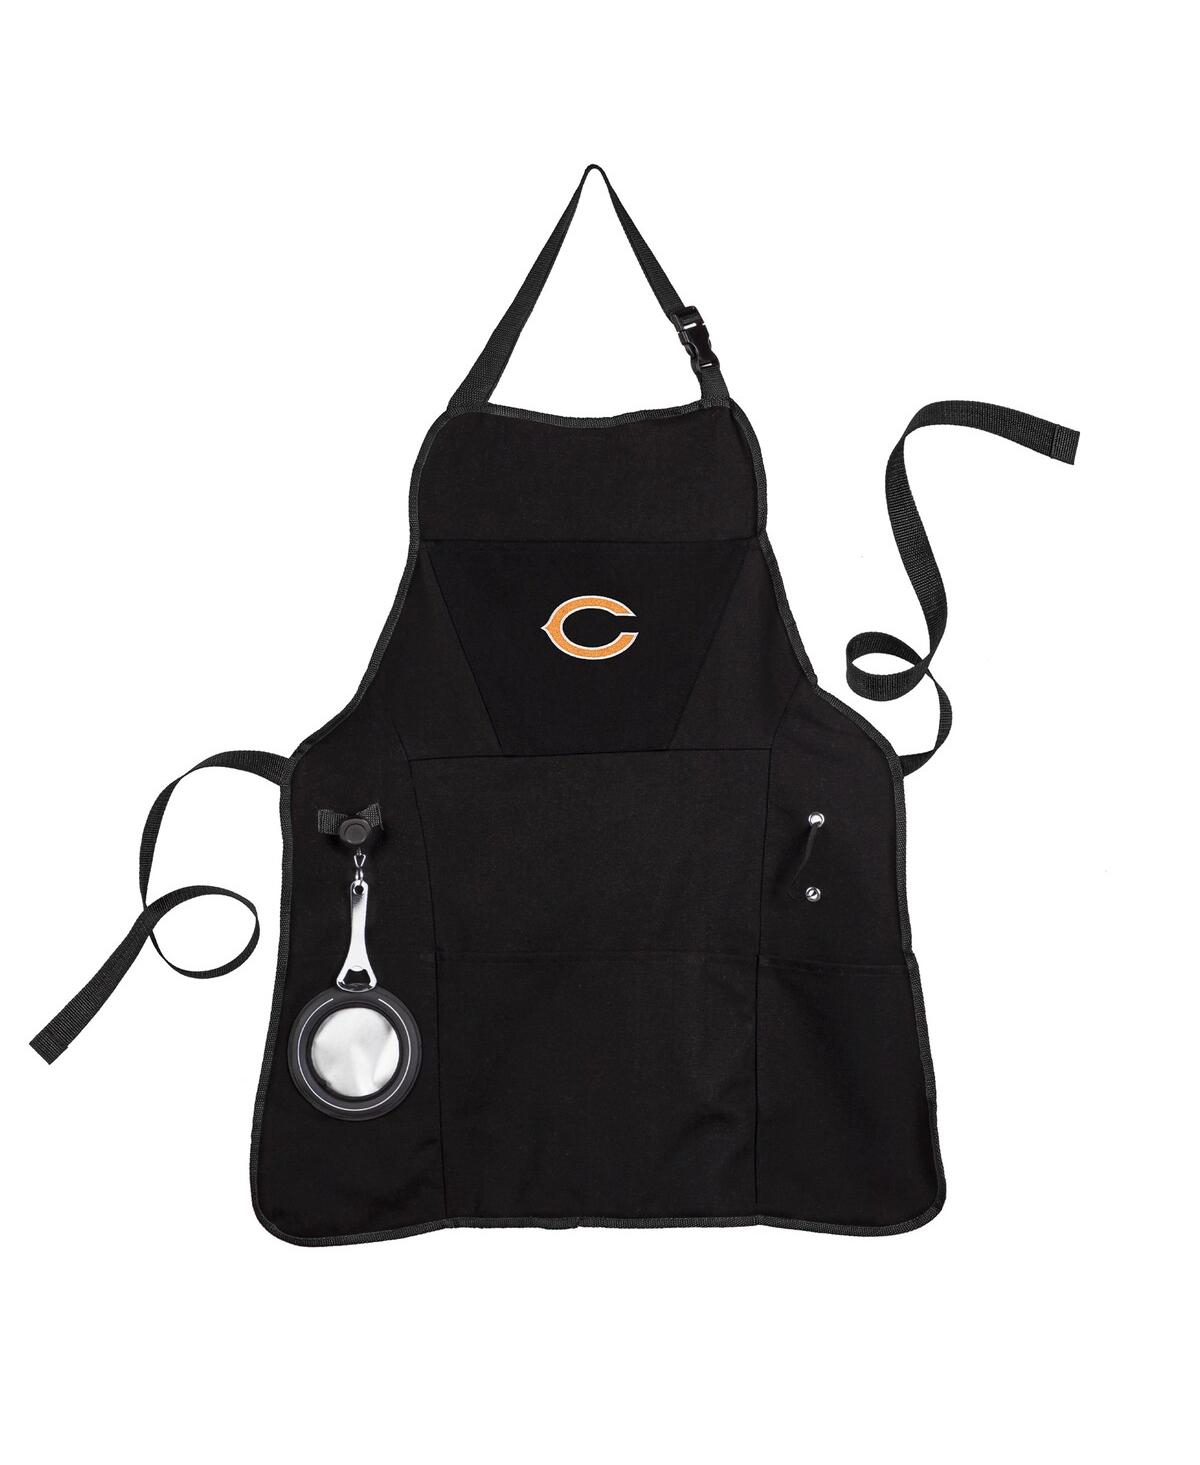 Chicago Bears Grill Apron - Black